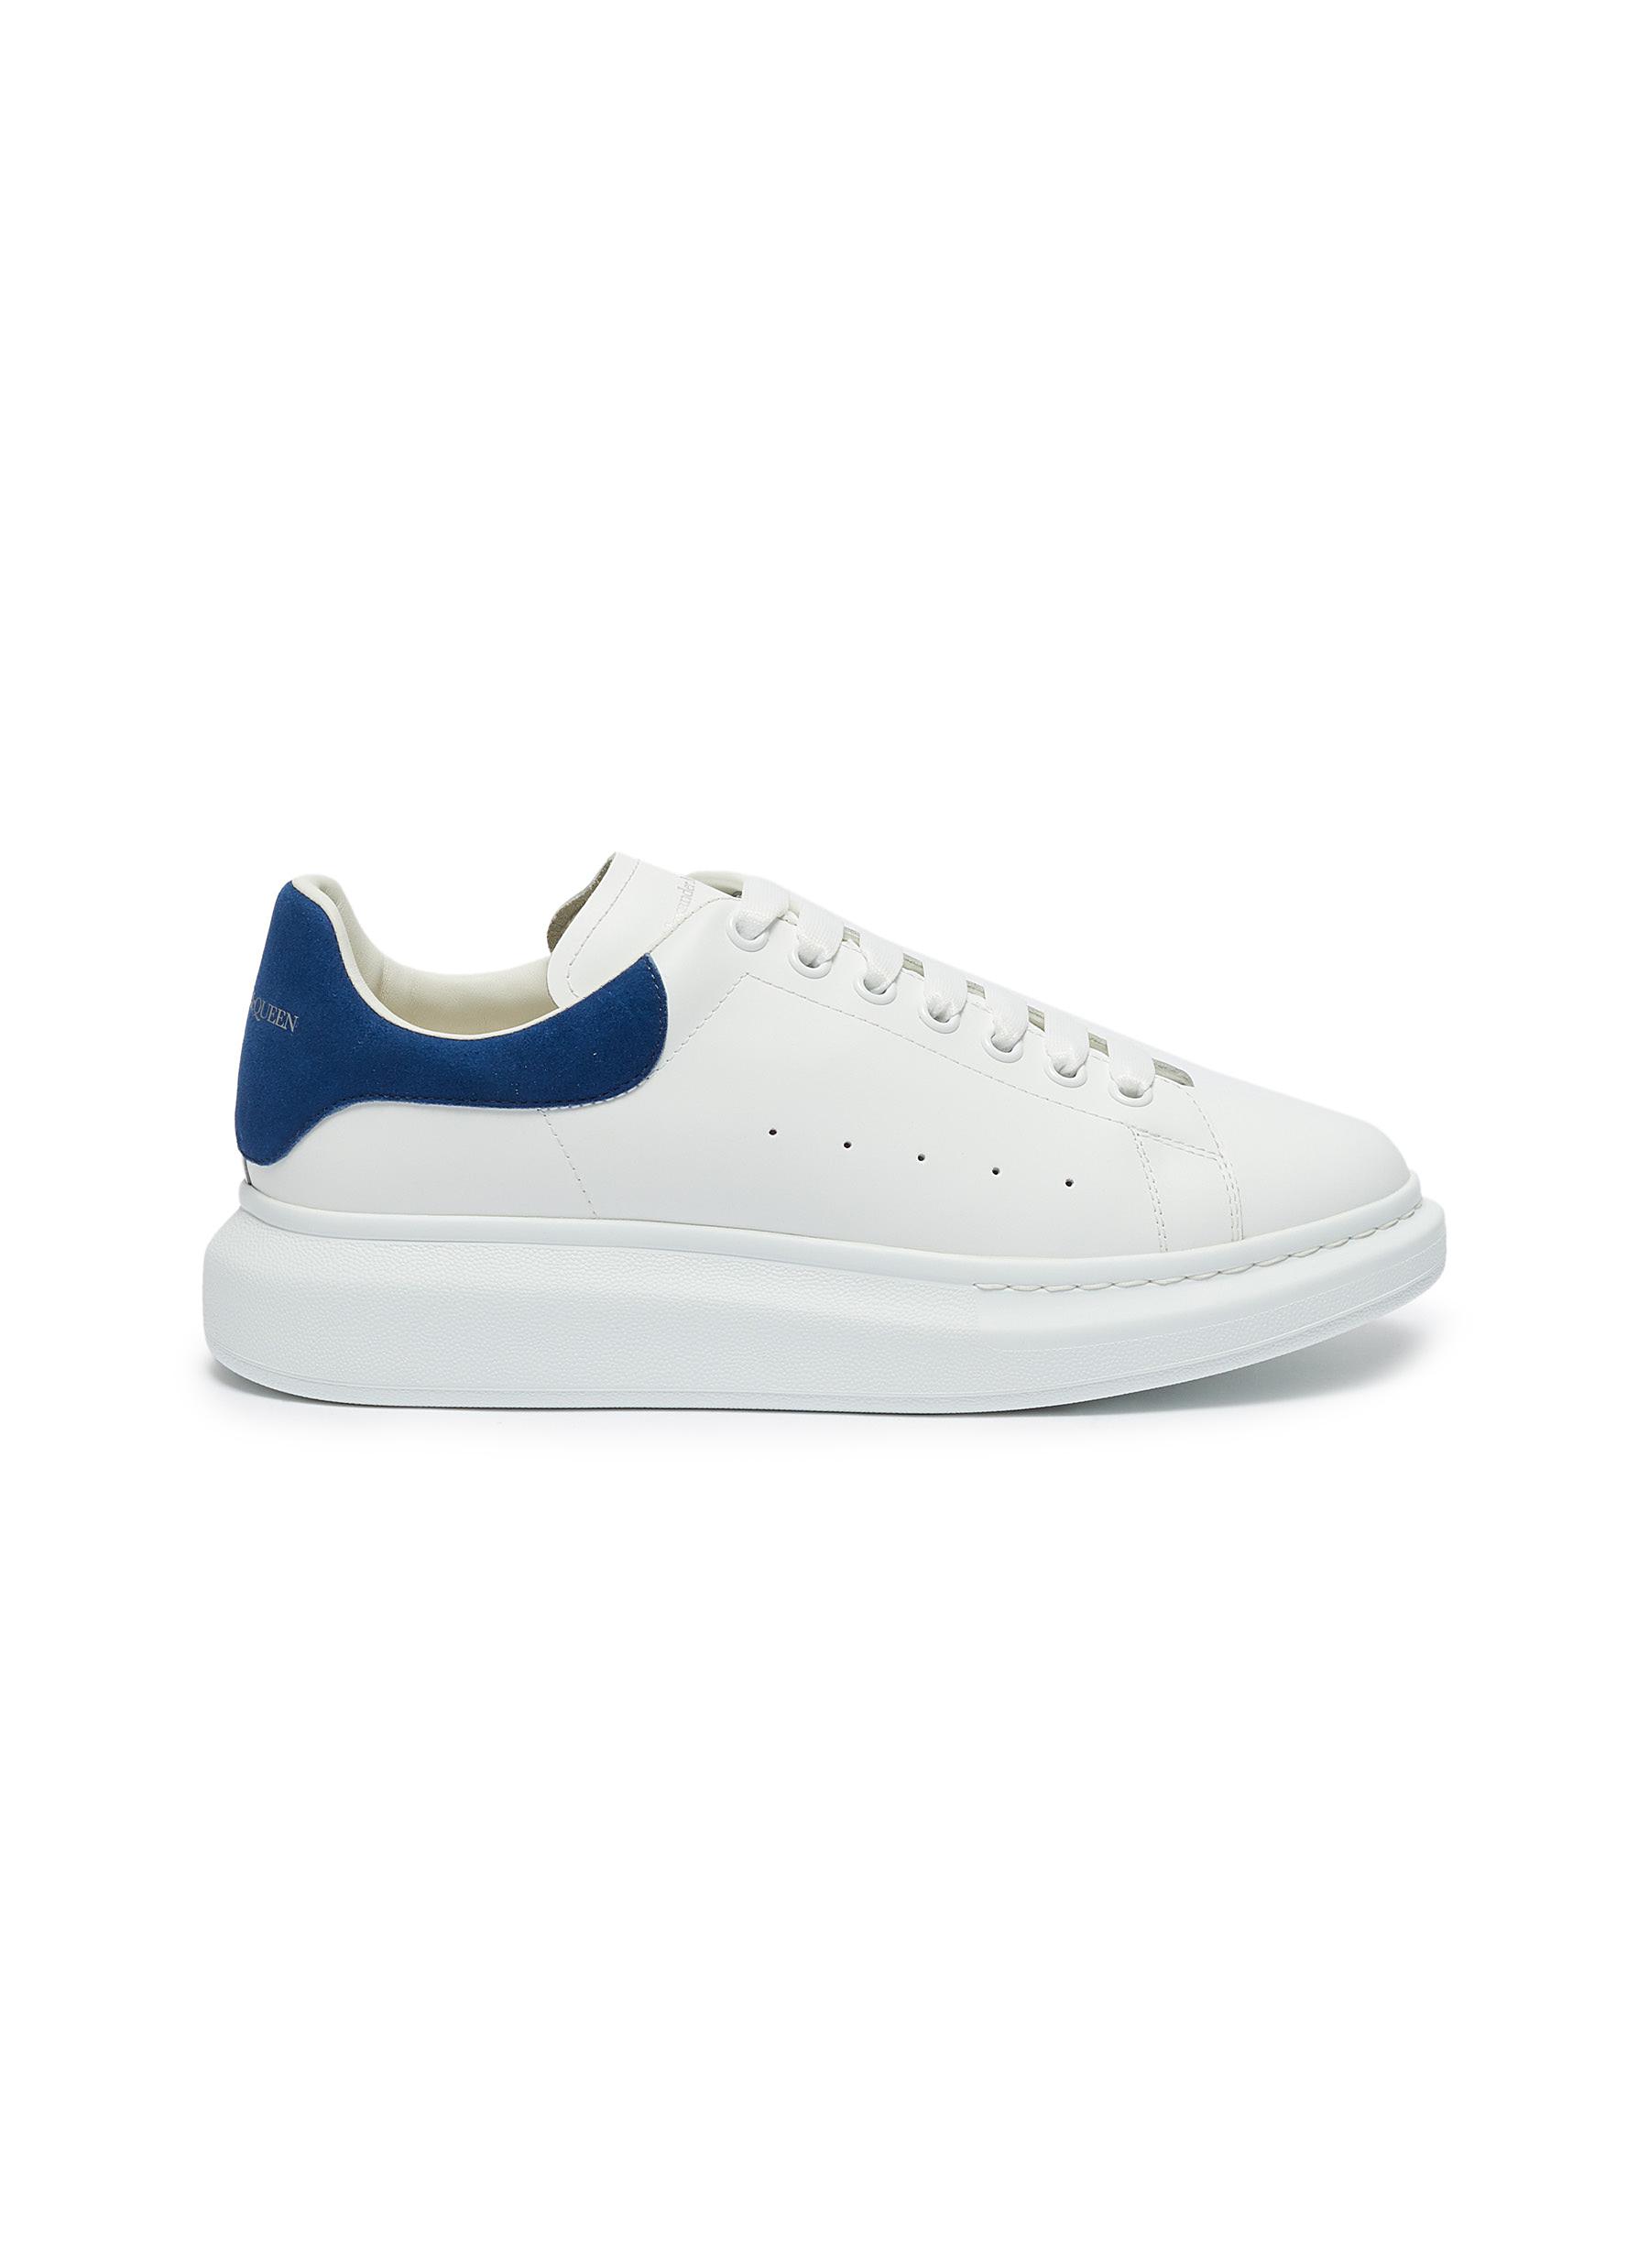 white and blue alexander mcqueen